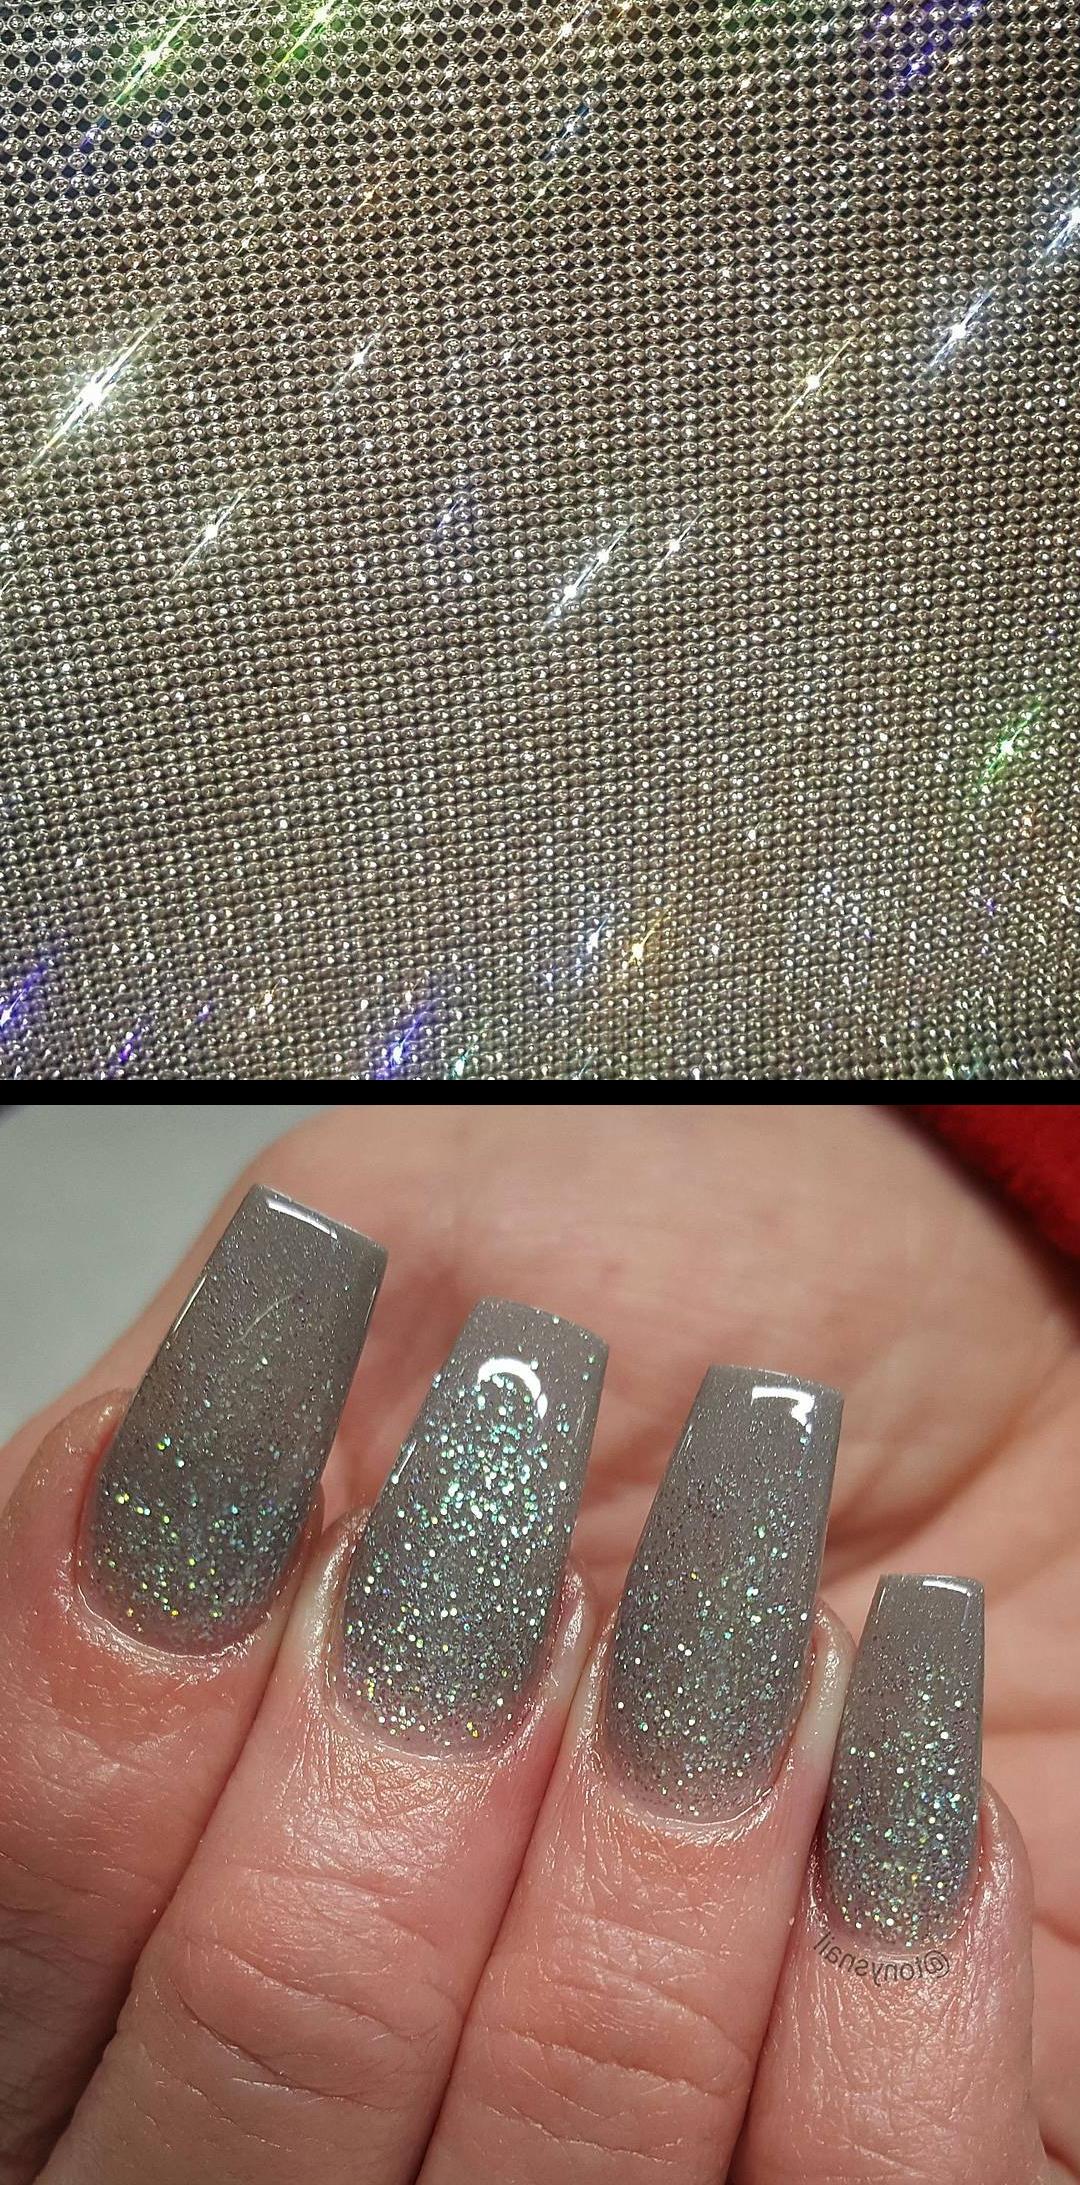 envy nails, nail envy, chrome nails, nail envy, sun nails Look those bling  Crytals Sheet  17 inches 46 inches    Ombre nails design!  Shop Now   